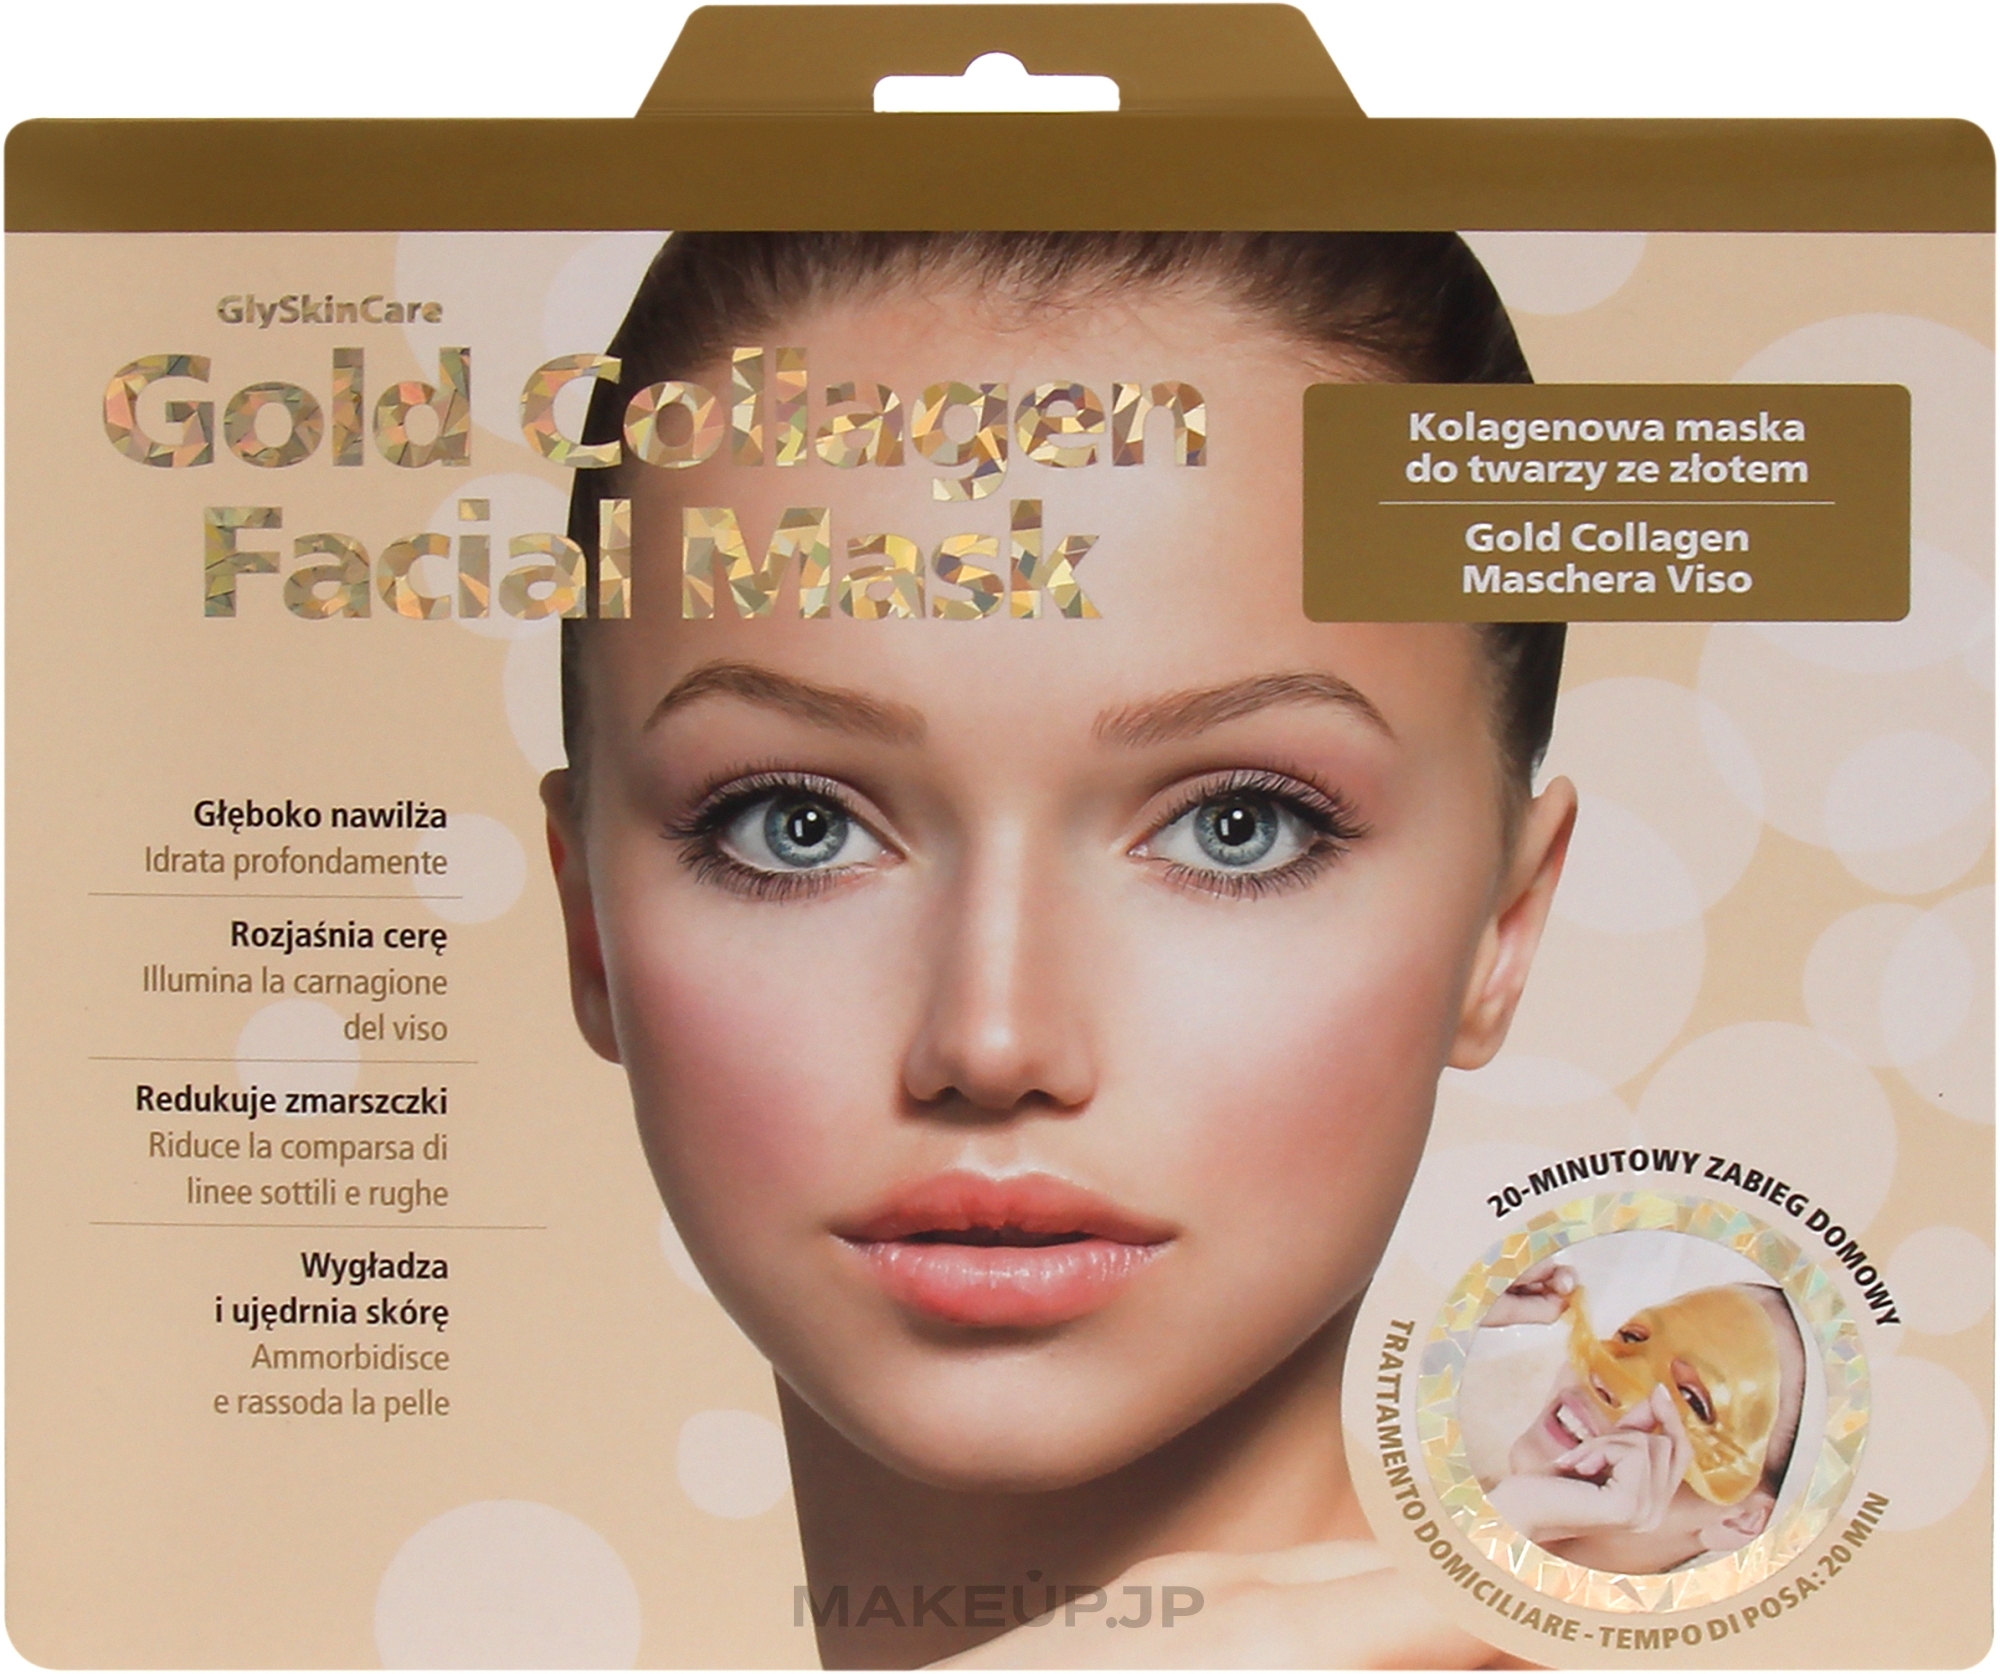 Collagen Face Mask with Gold - GlySkinCare Gold Collagen Facial Mask — photo 1 szt.